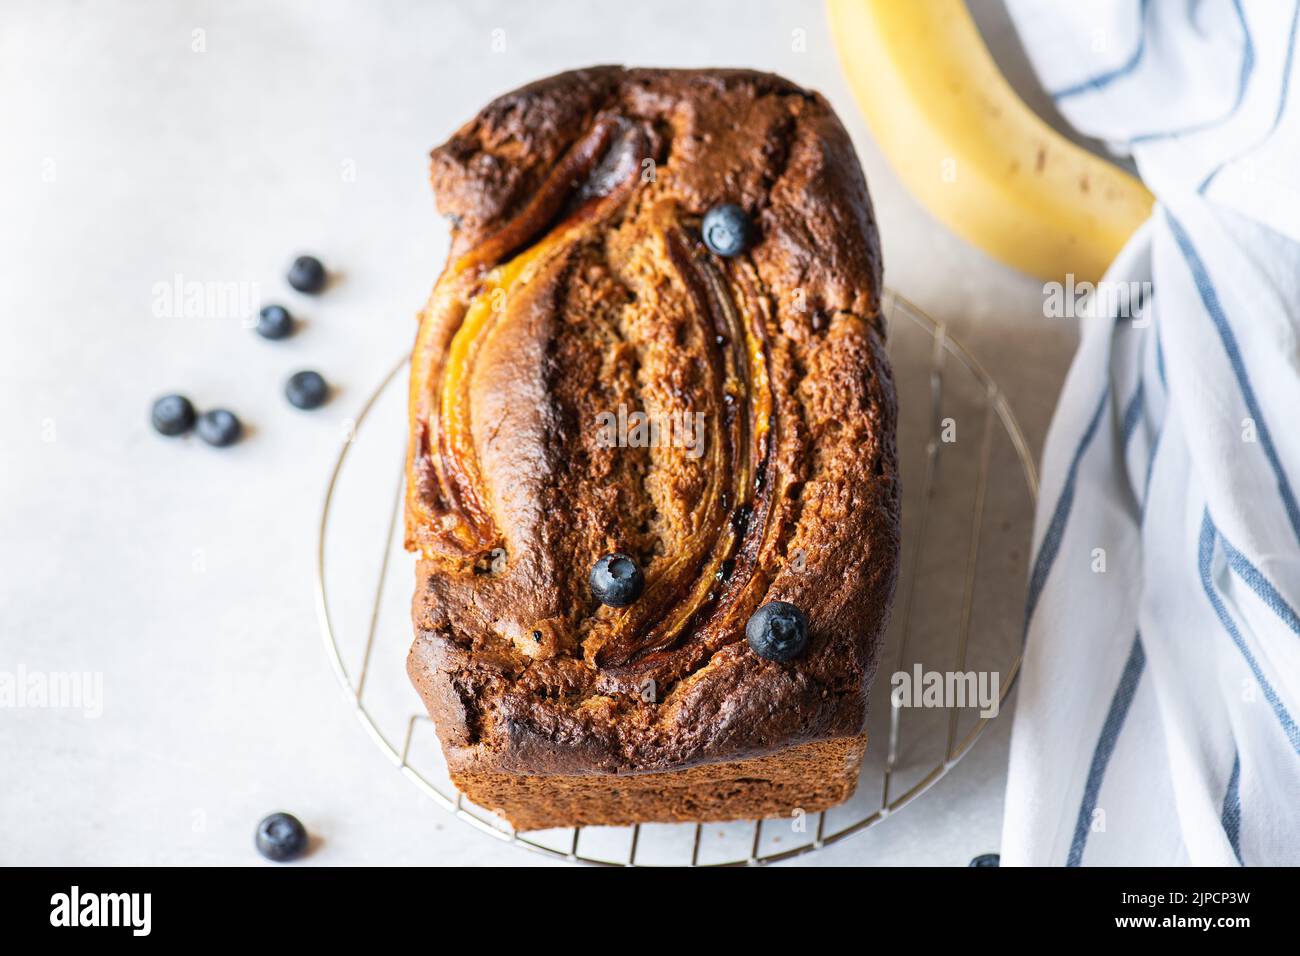 Banana bread with blueberries on a cooling rack on a gray background. Overhead view. Stock Photo